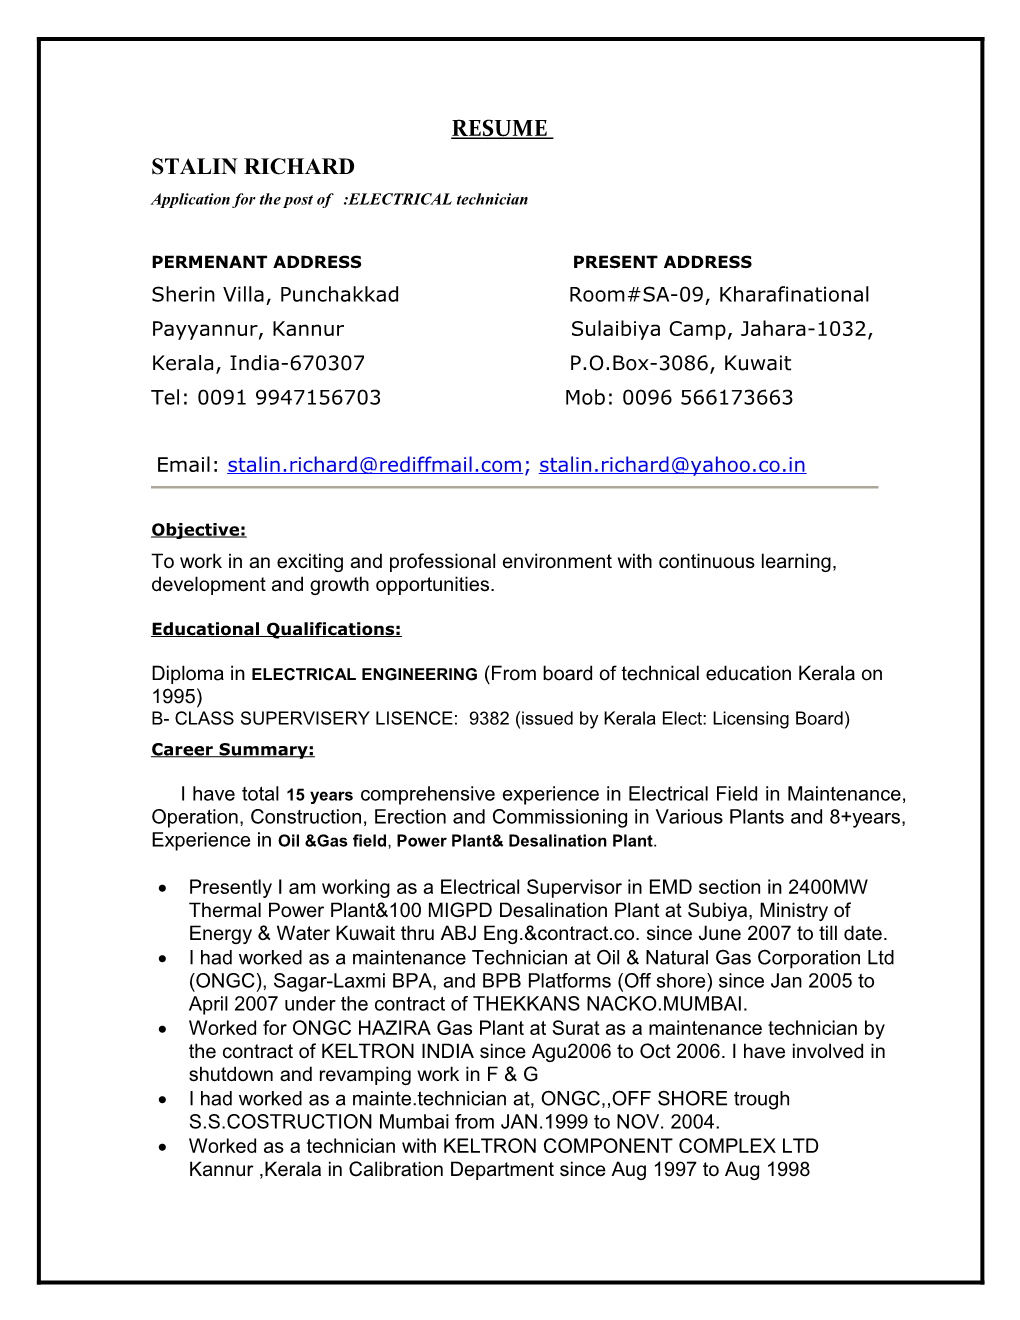 Application for the Post of :ELECTRICAL Technician